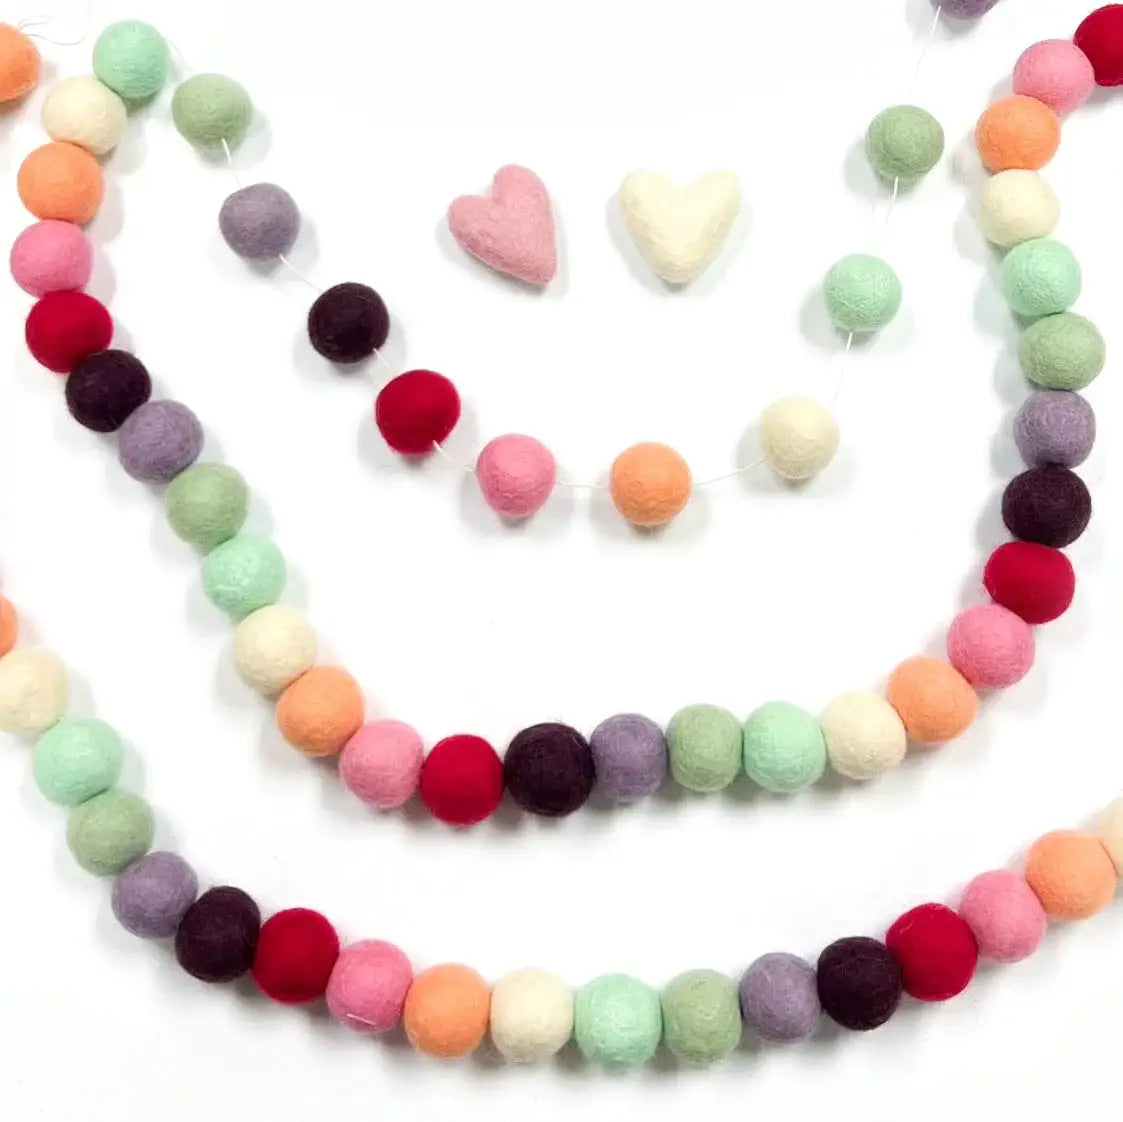 Macarons Eco Garlands/Ornaments: XL - 84 beads/25ft (1" beads)